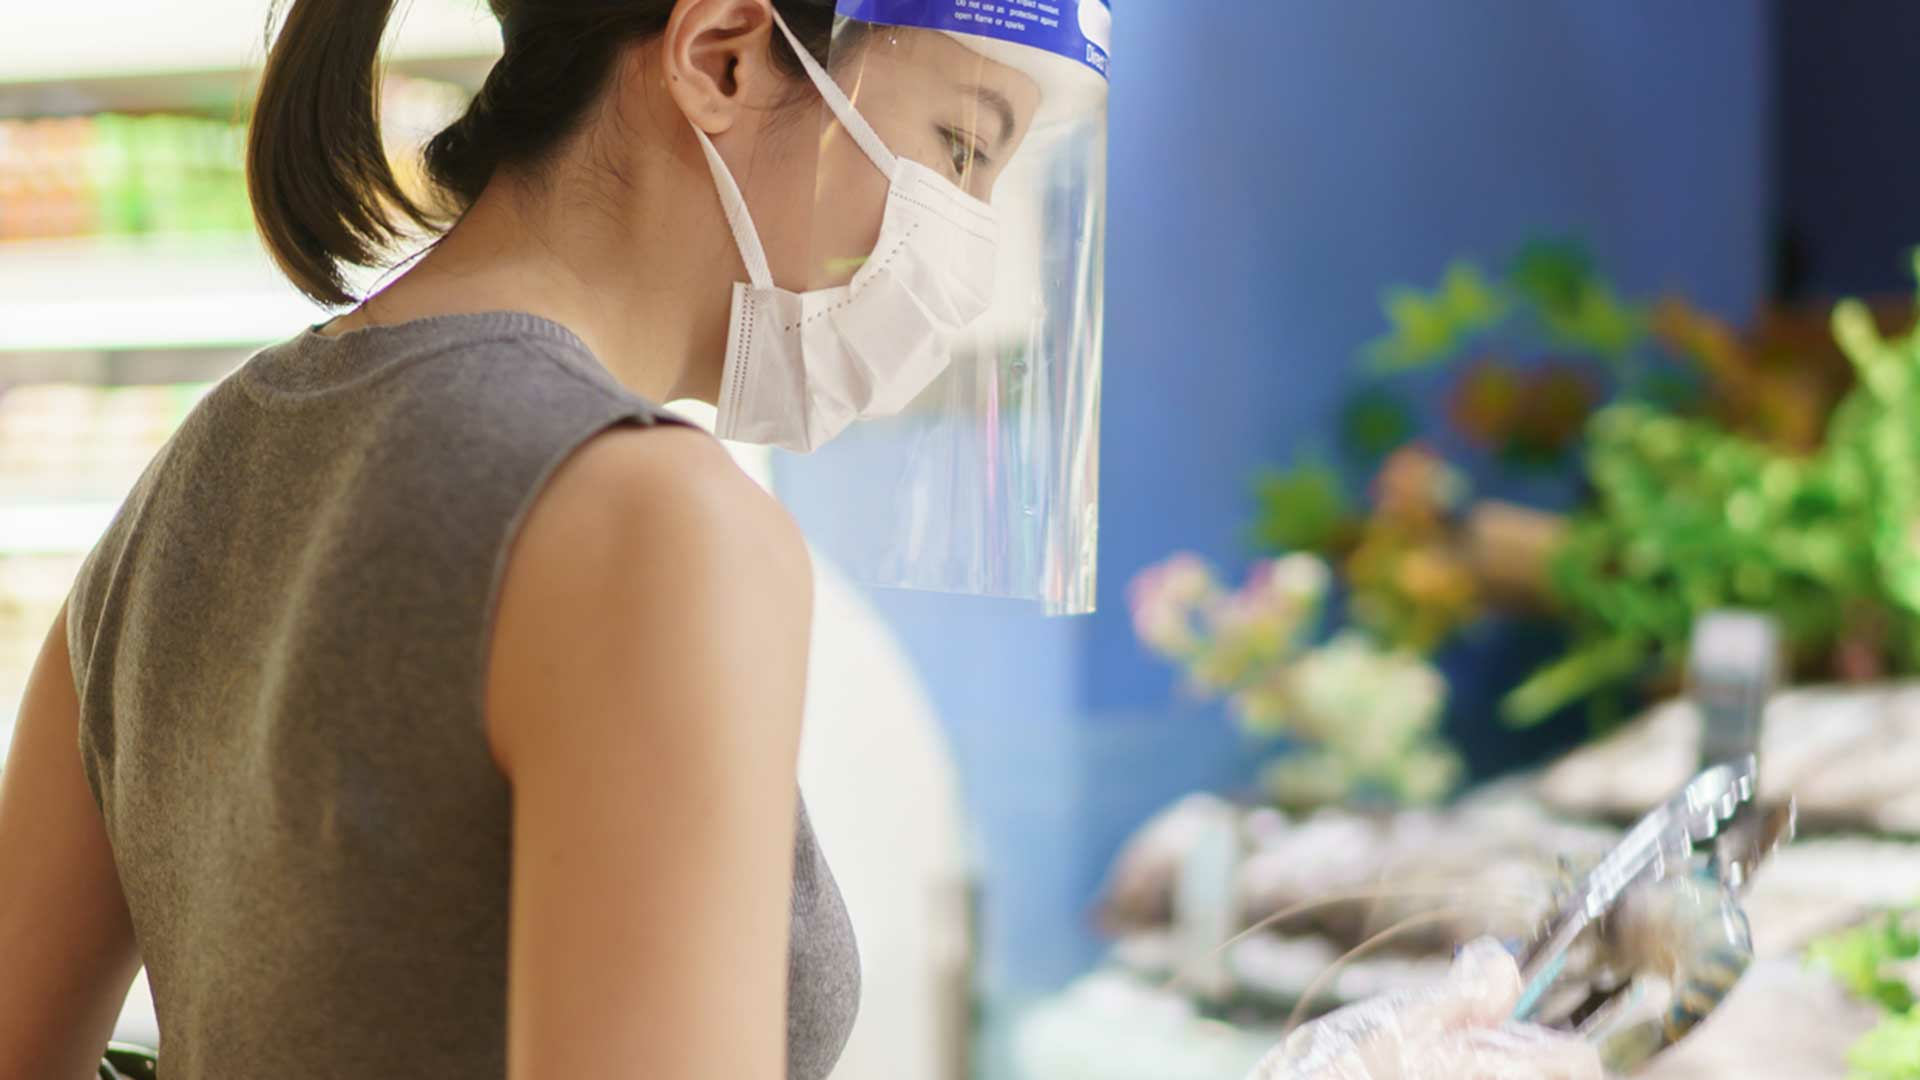 woman working with face cover